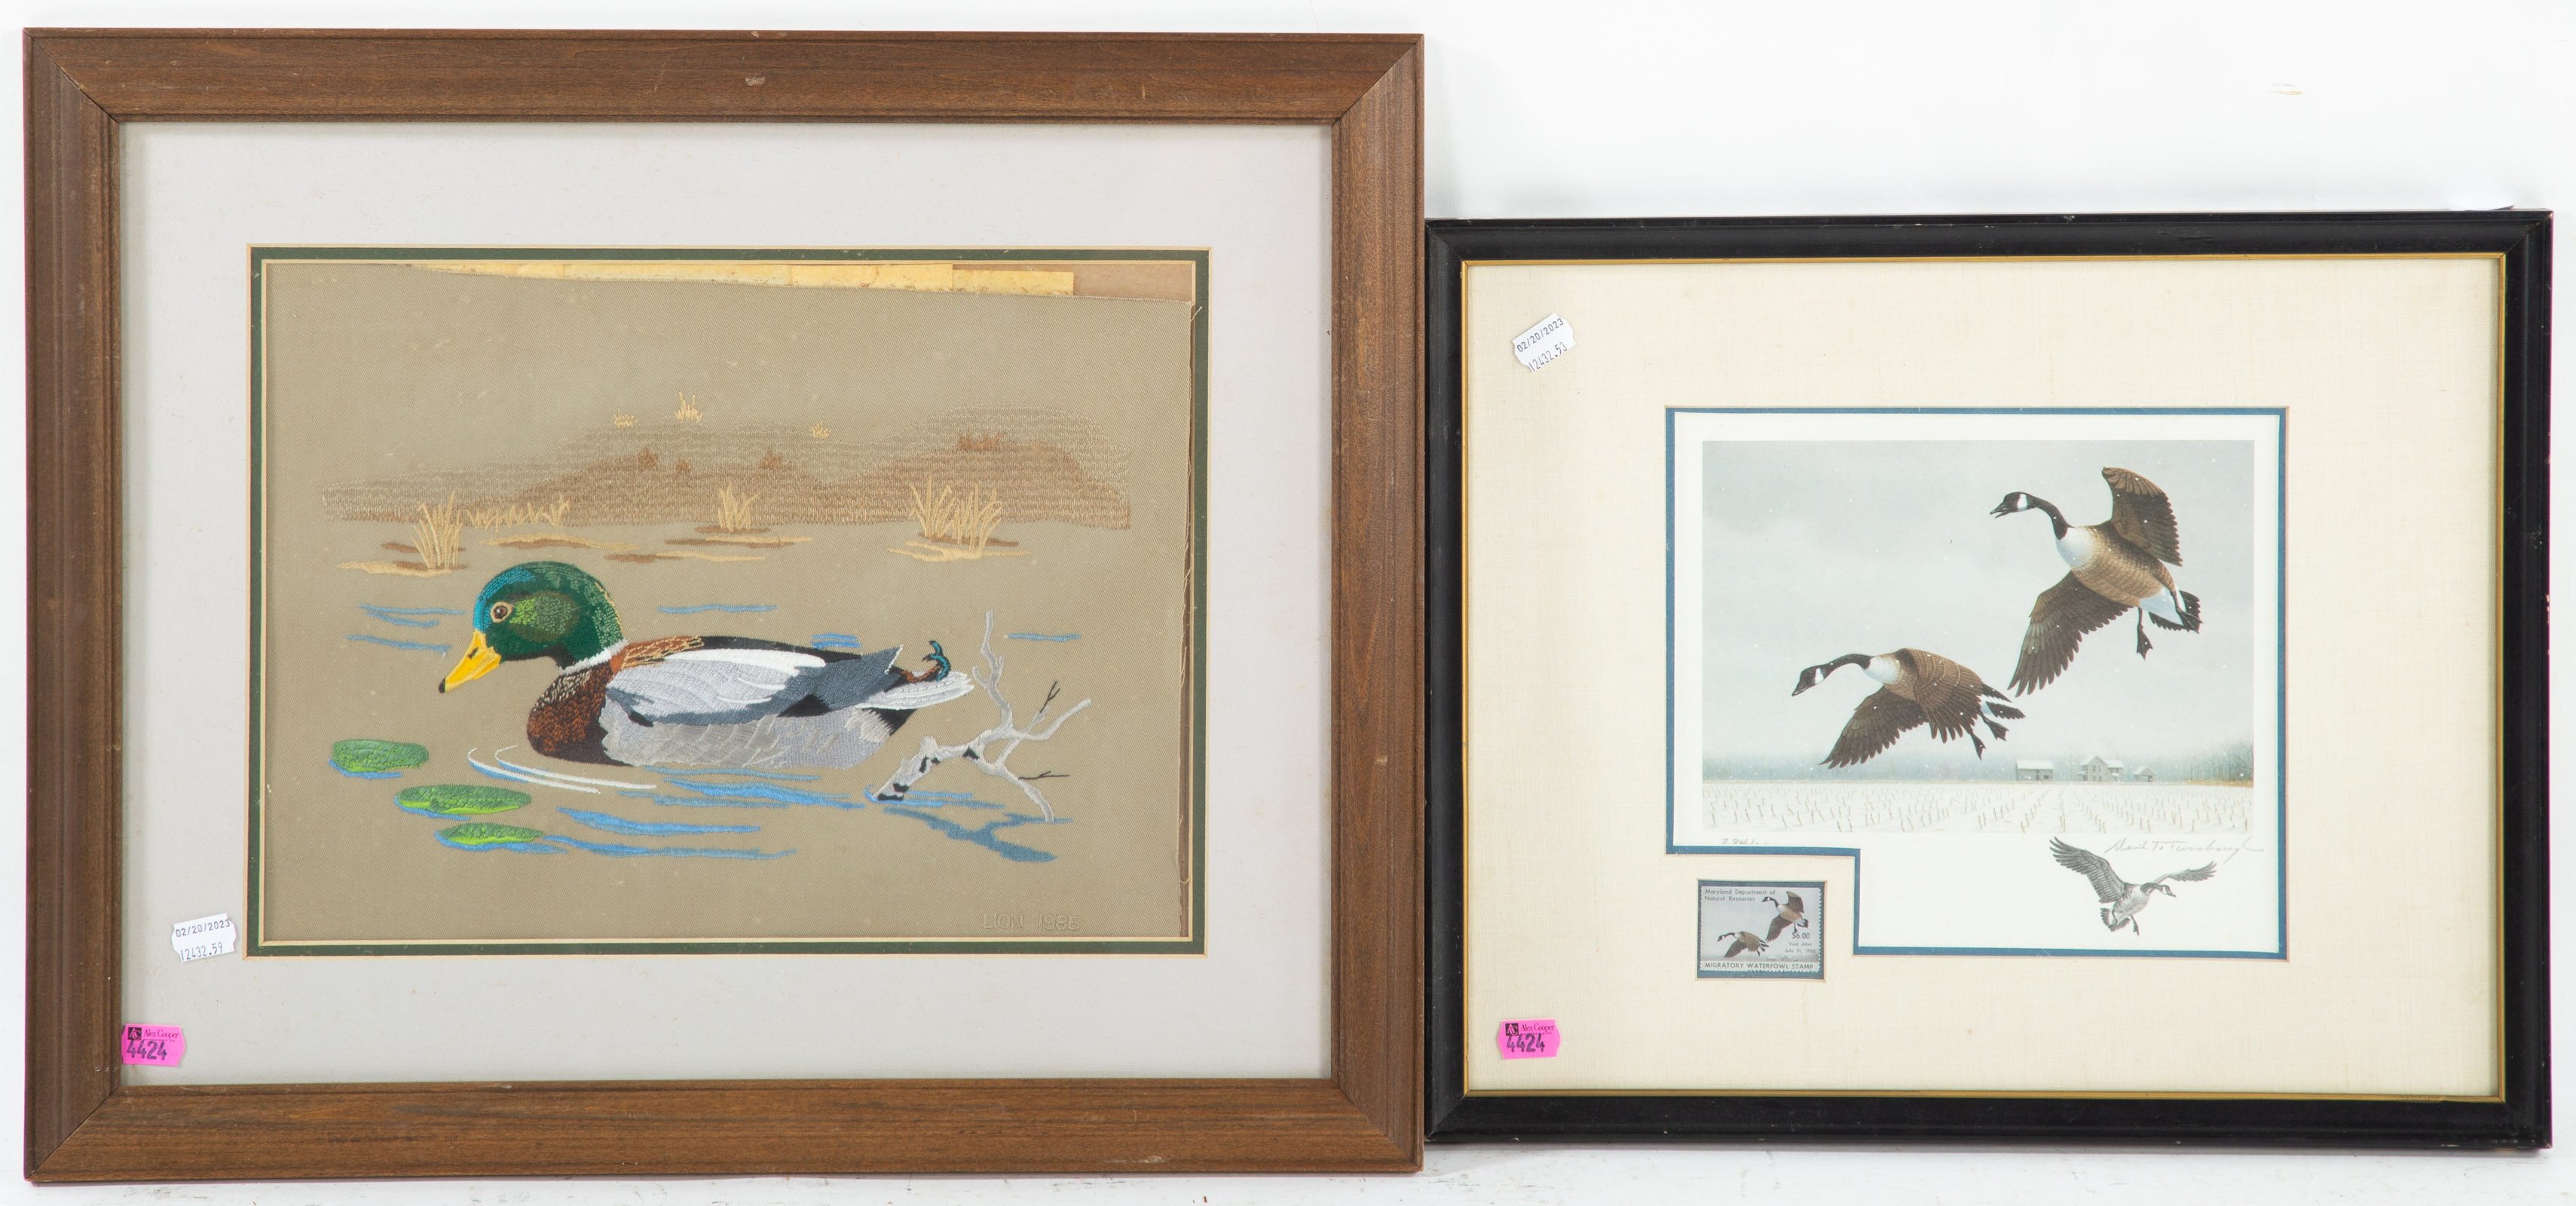 TWO FRAMED MARYLAND DUCK THEMED